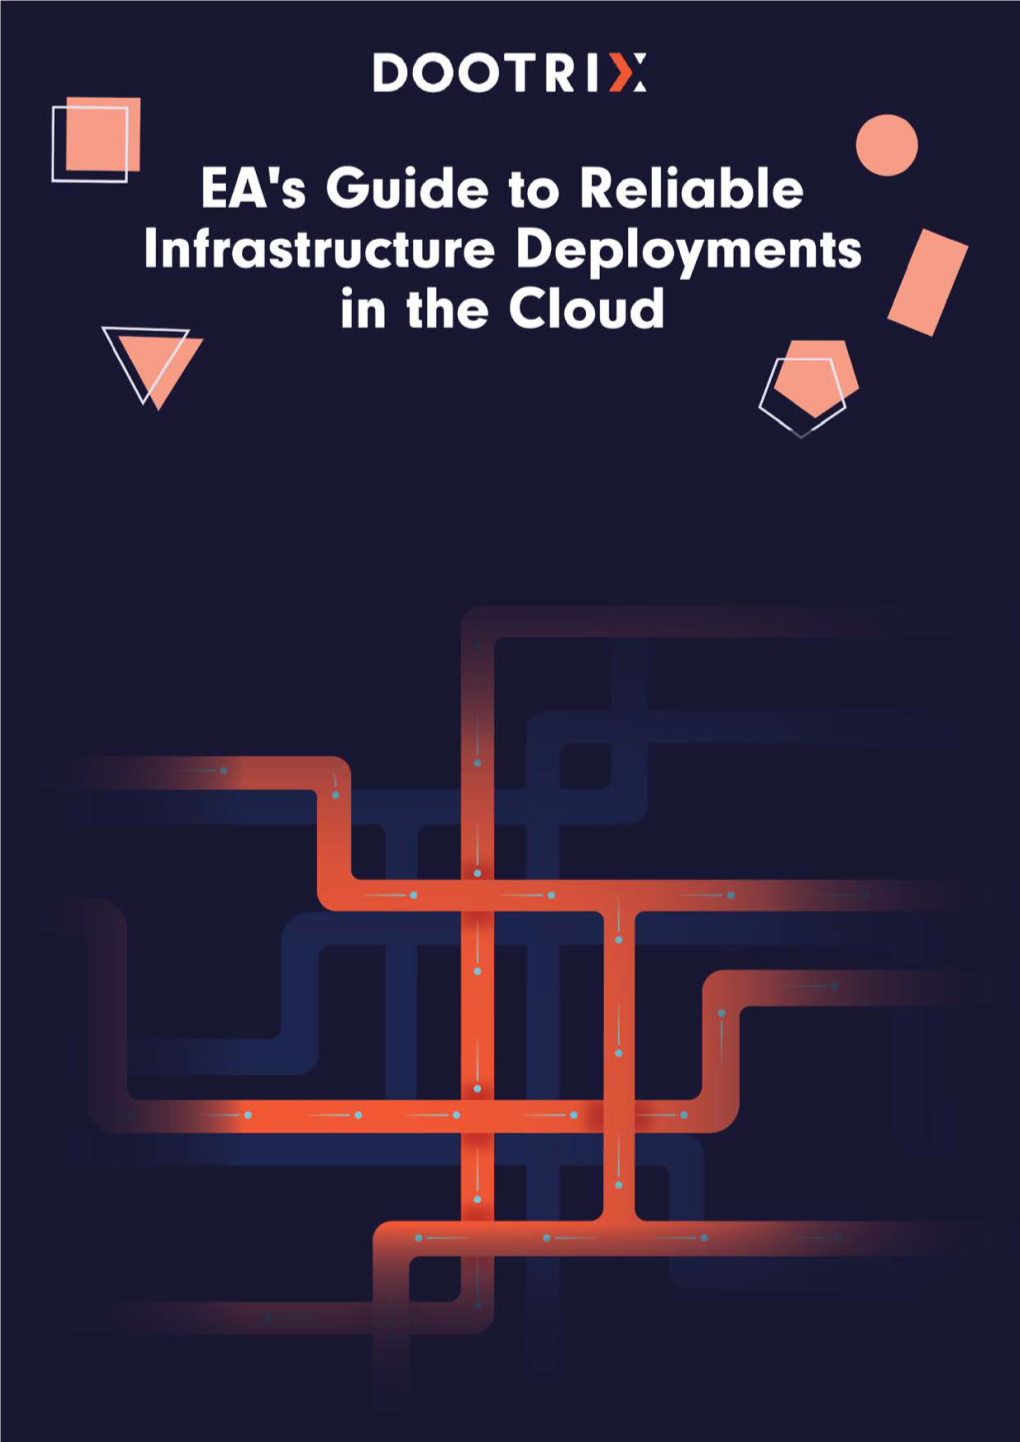 The EA's Guide to Reliable Infrastructure Deployments